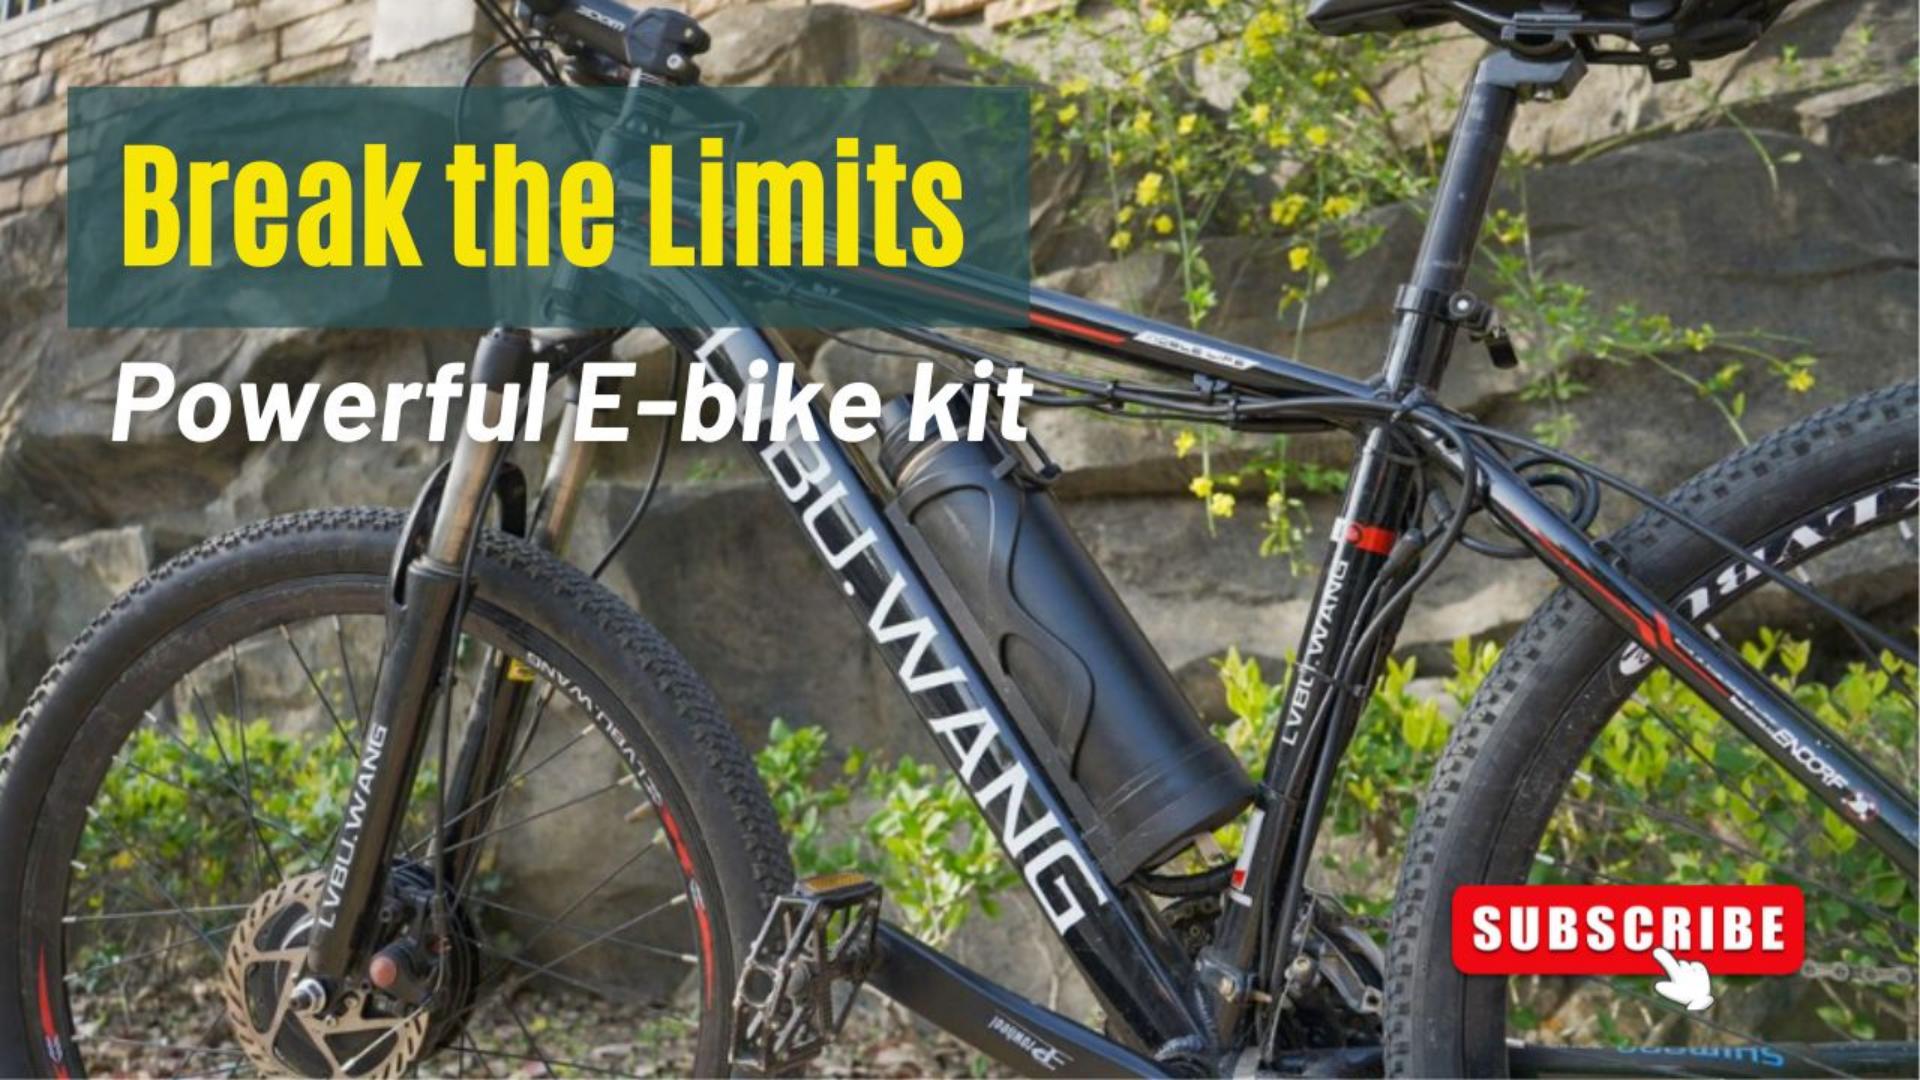 Break the Limits: Use the Ebike Kit to make your bicycle more powerful.